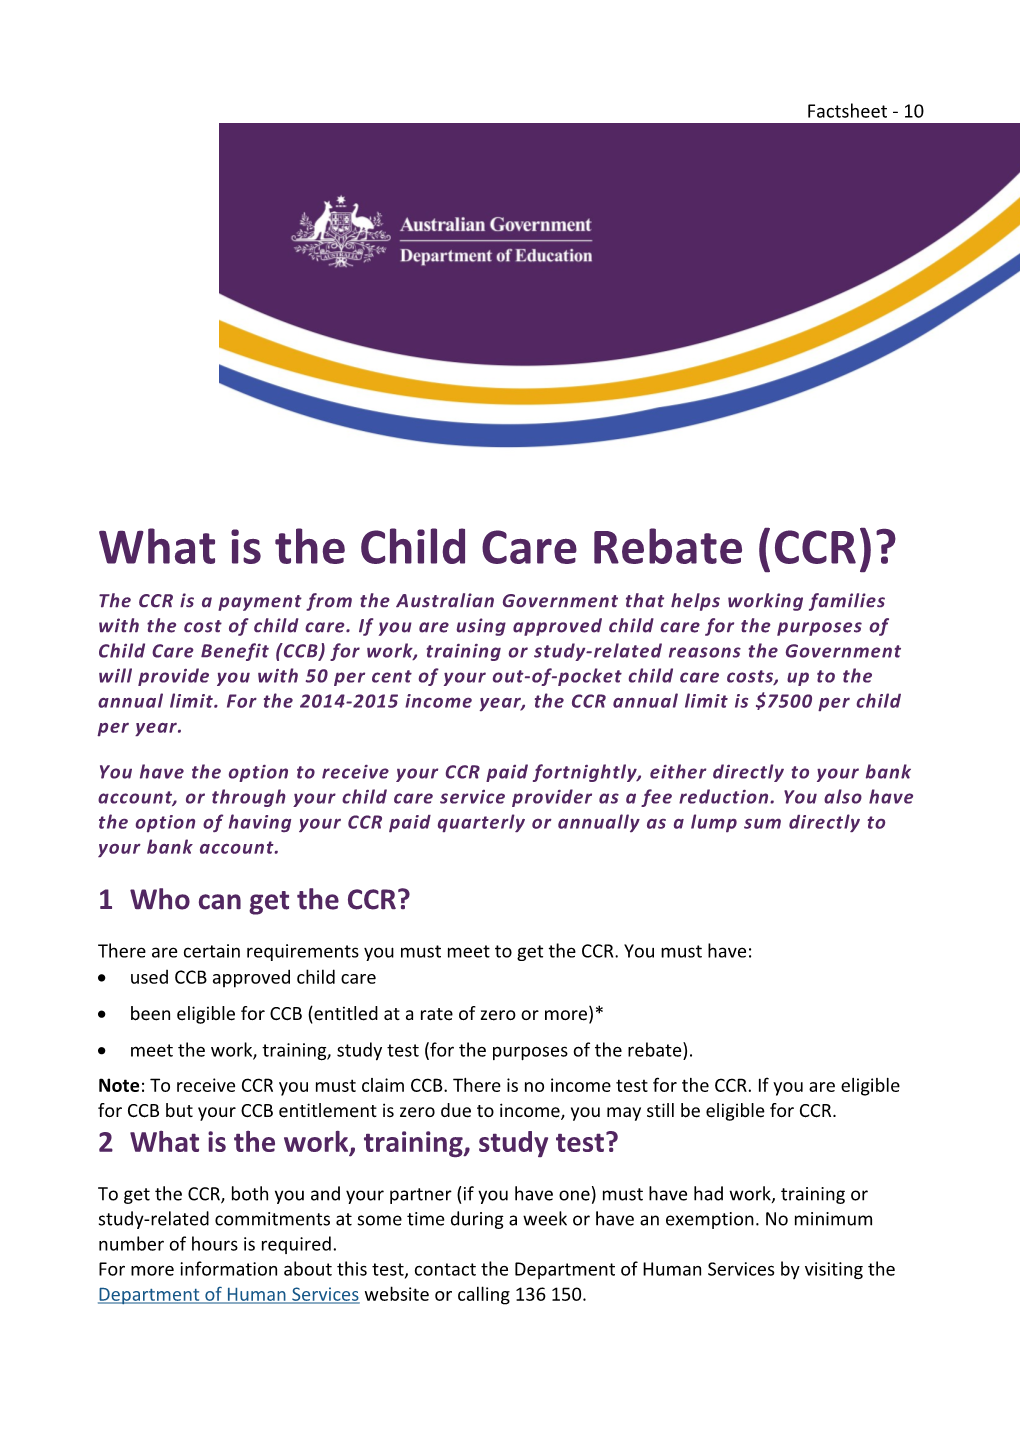 What Is the Child Care Rebate (CCR)?